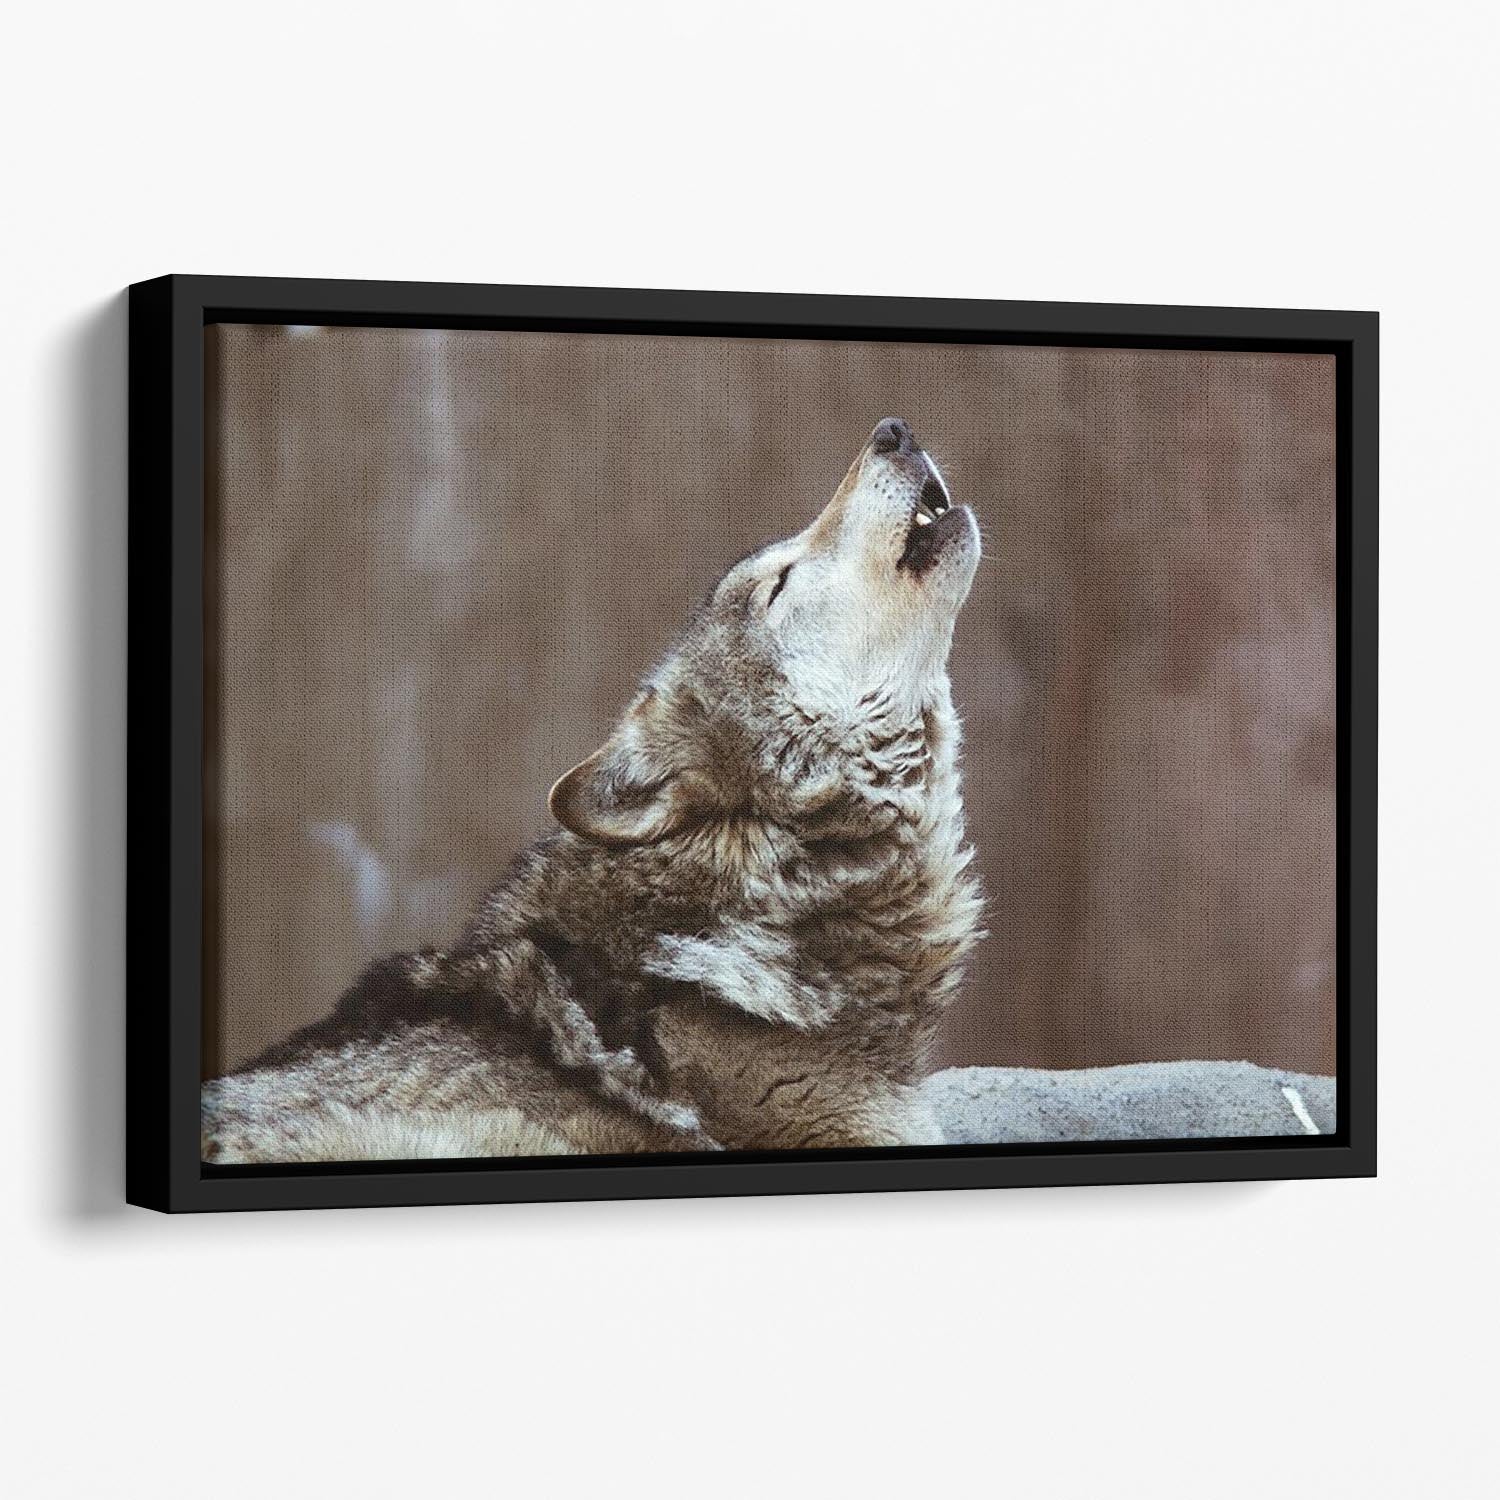 Wolves howl in Moscow Zoo Floating Framed Canvas - Canvas Art Rocks - 1